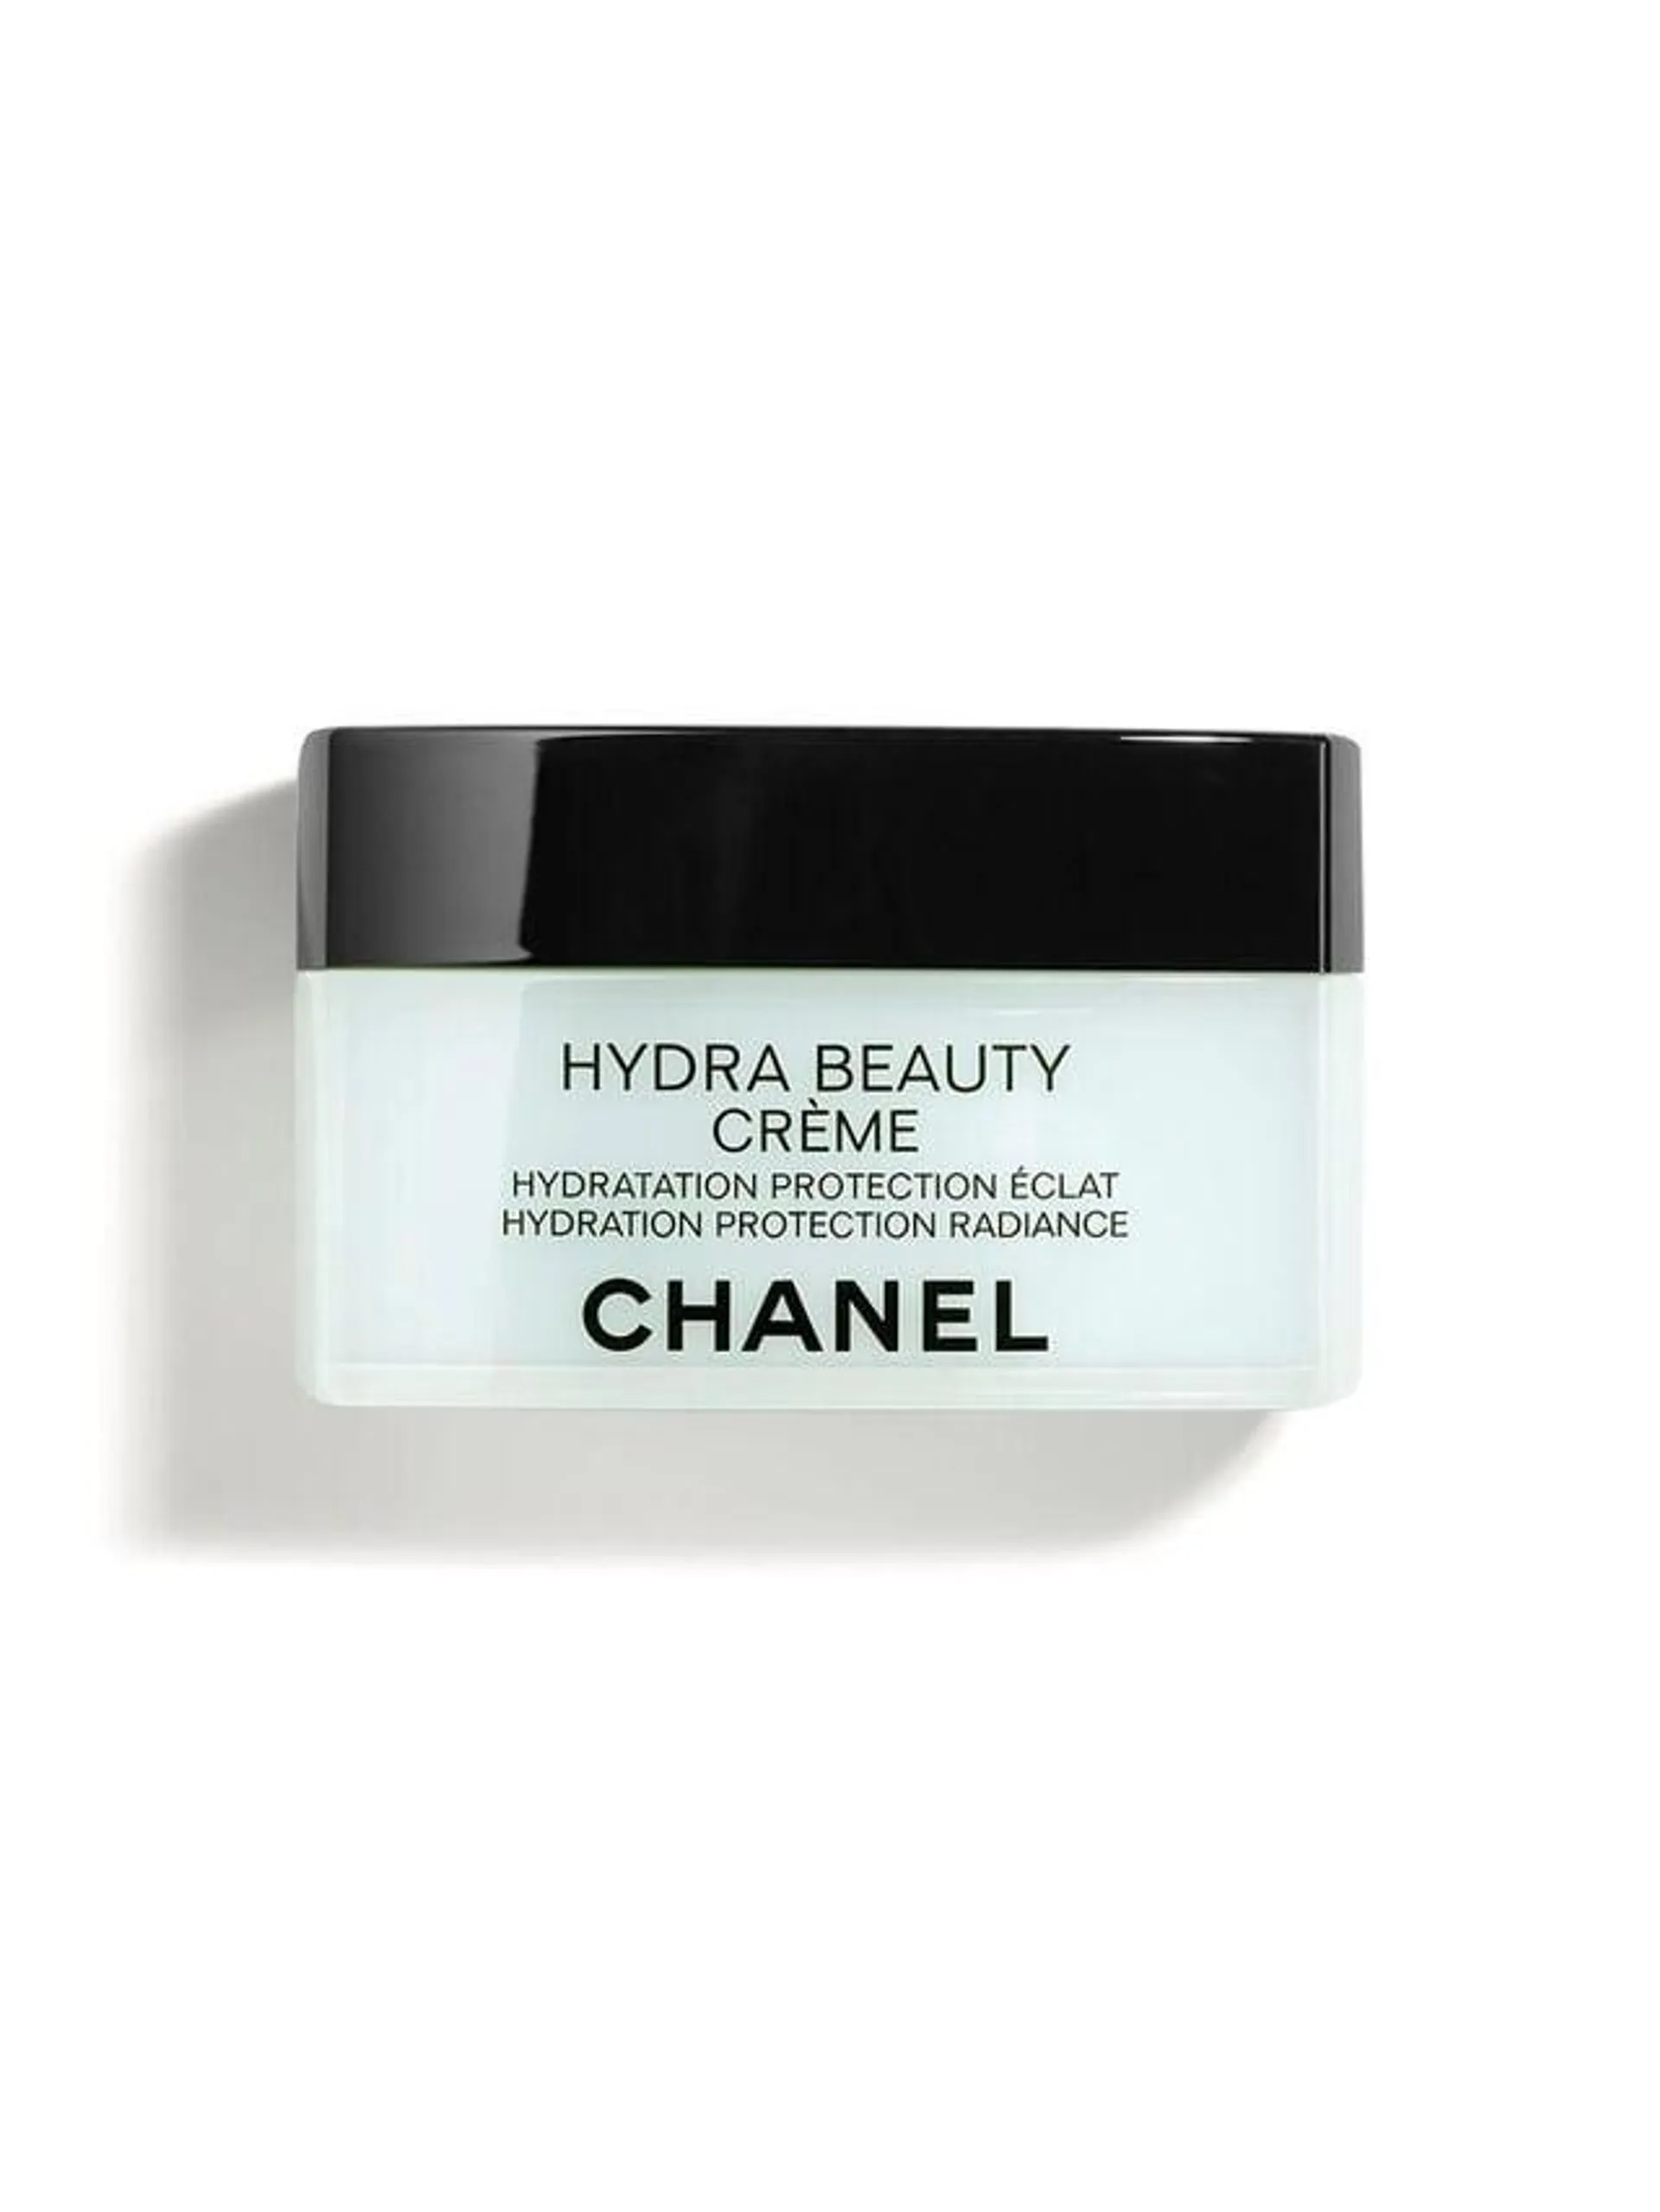 CHANEL HYDRA BEAUTY Crème Hydration Protection Radiance